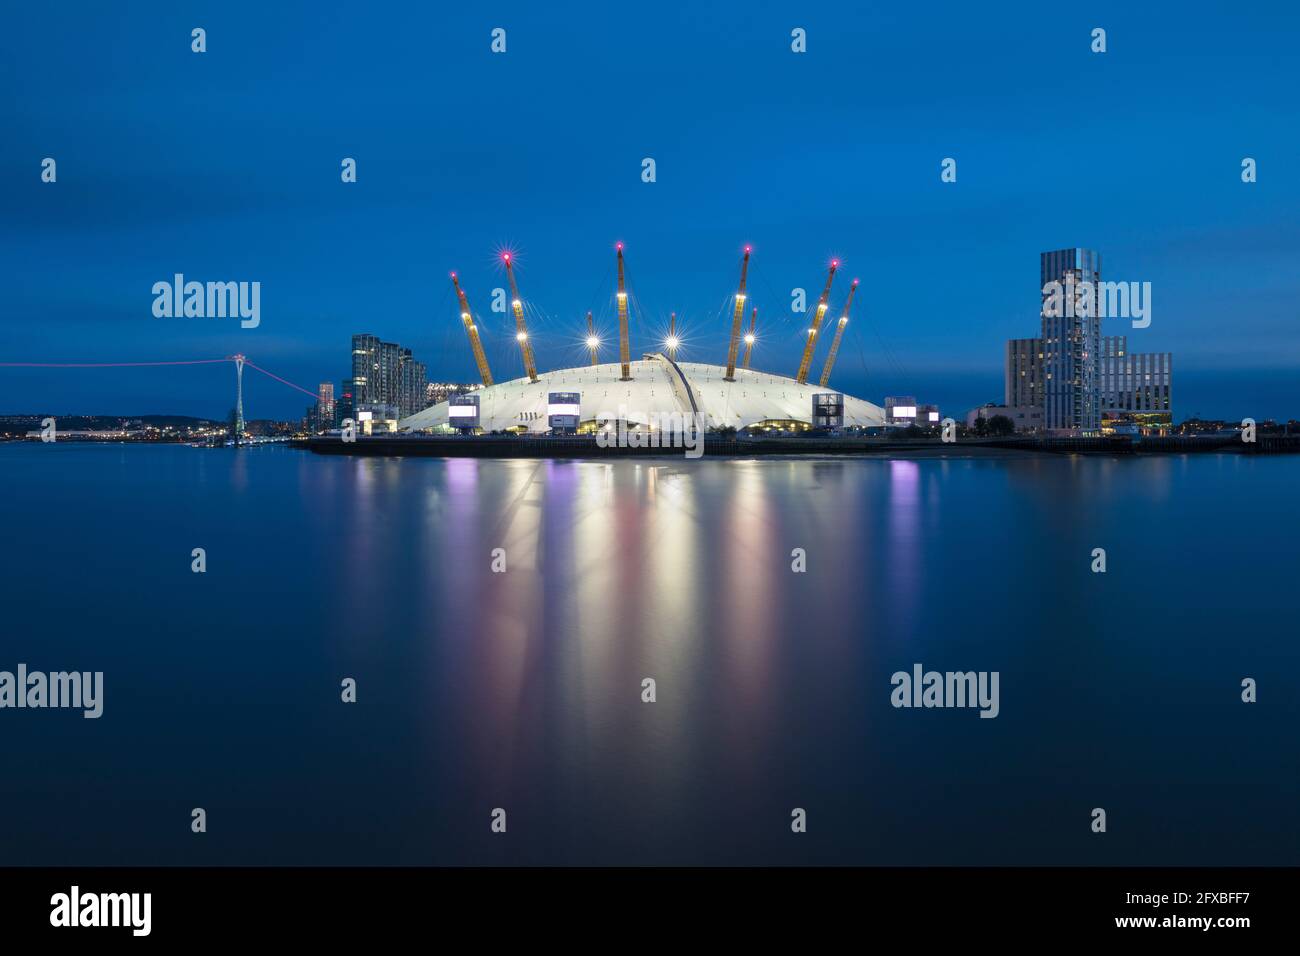 UK, England, London, Long exposure of River Thames and O2 Arena at dusk Stock Photo